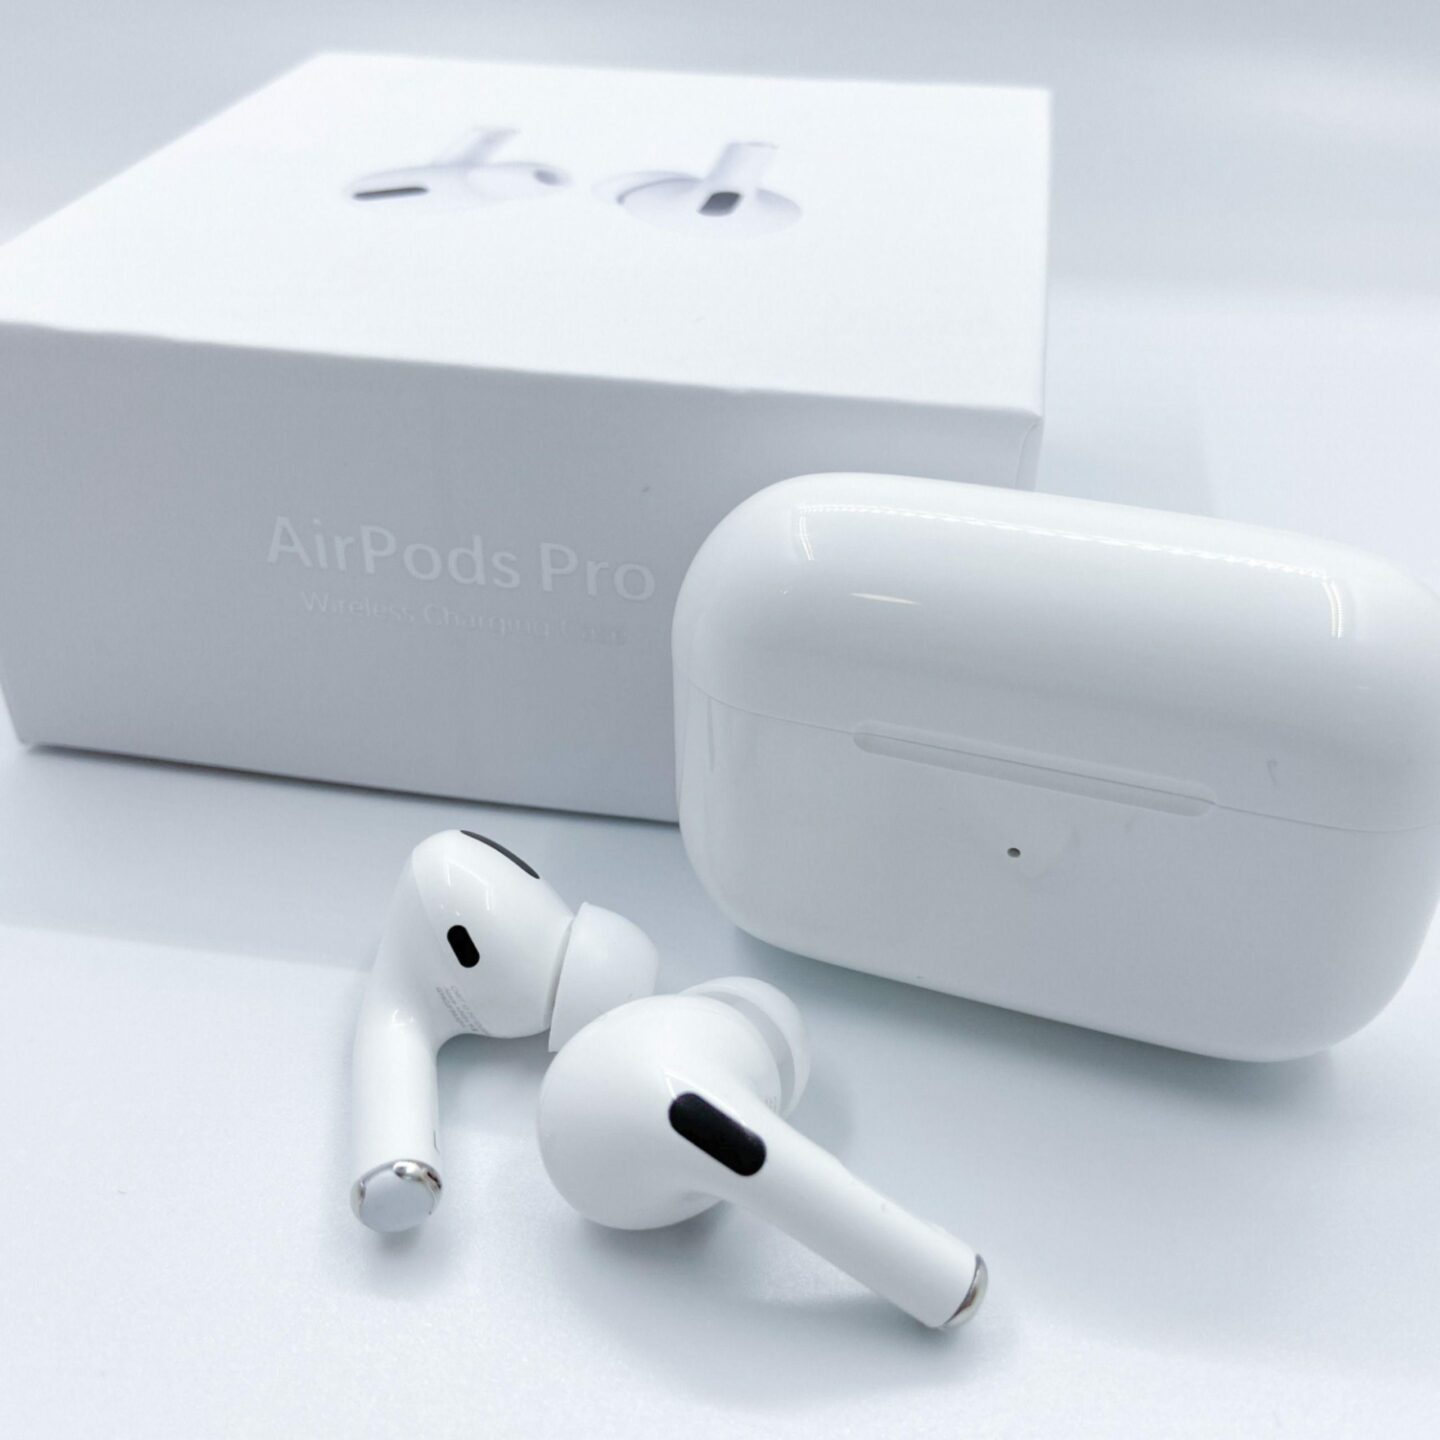 Buy AirPods Pro ANC 2nd Gen; ANC AirPods Pro 2nd Generation with 6 Months Warranty Best Price in Sri Lanka | ido.lk